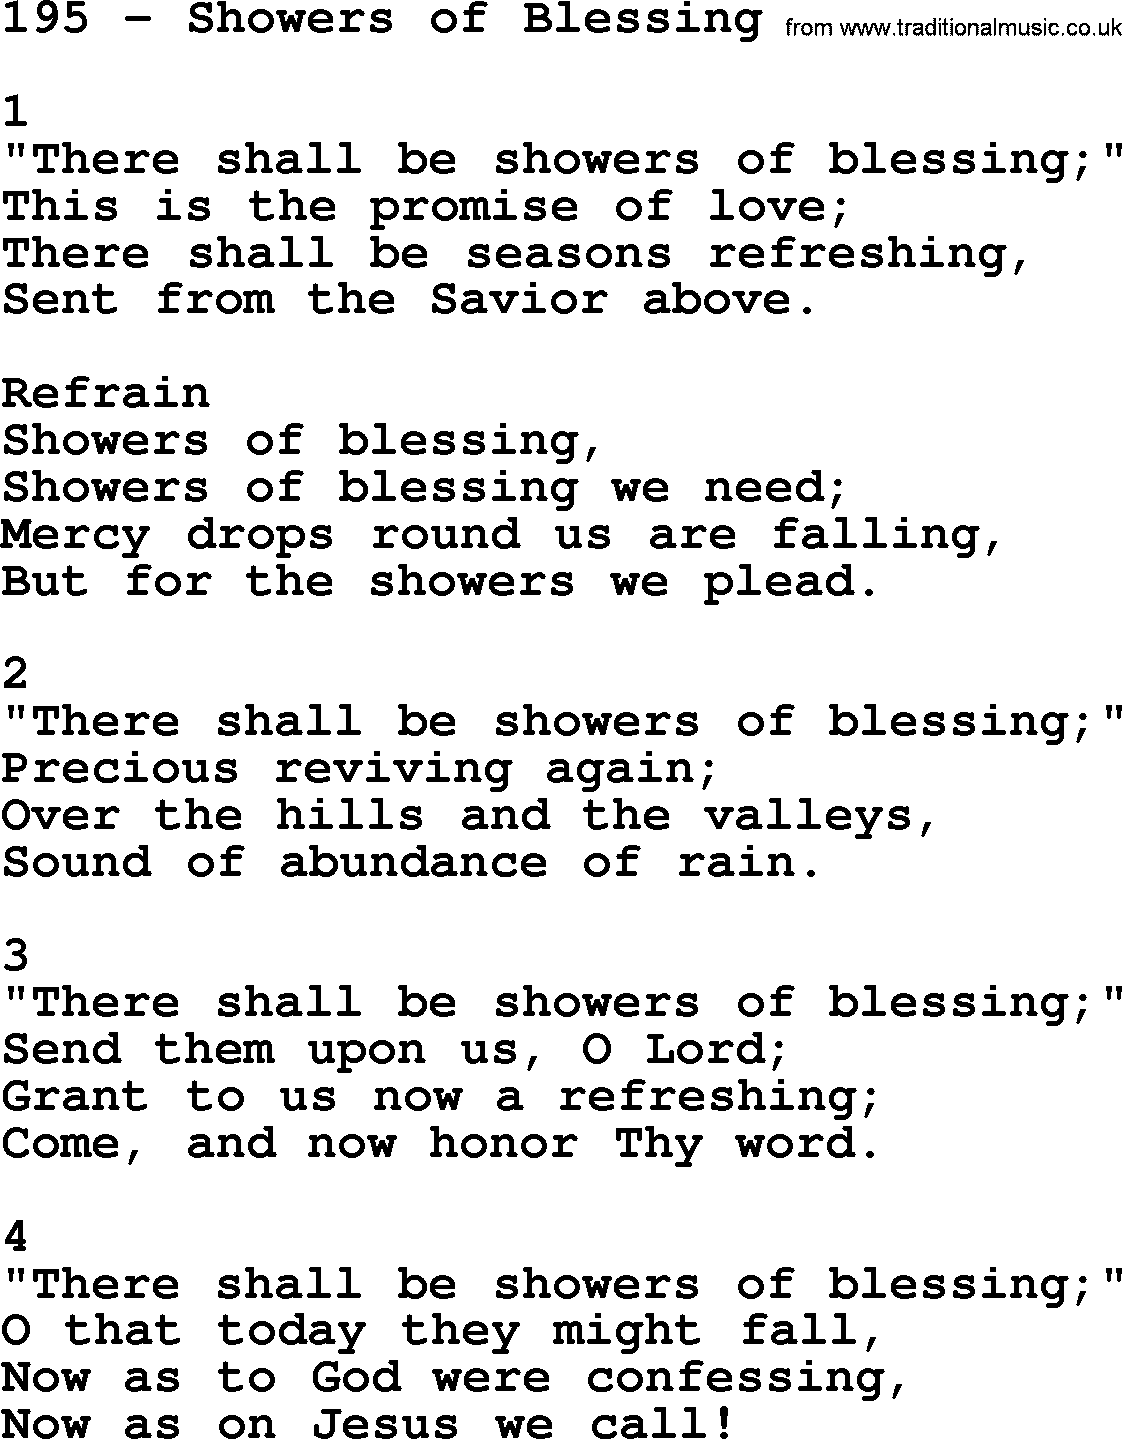 Complete Adventis Hymnal, title: 195-Showers Of Blessing, with lyrics, midi, mp3, powerpoints(PPT) and PDF,